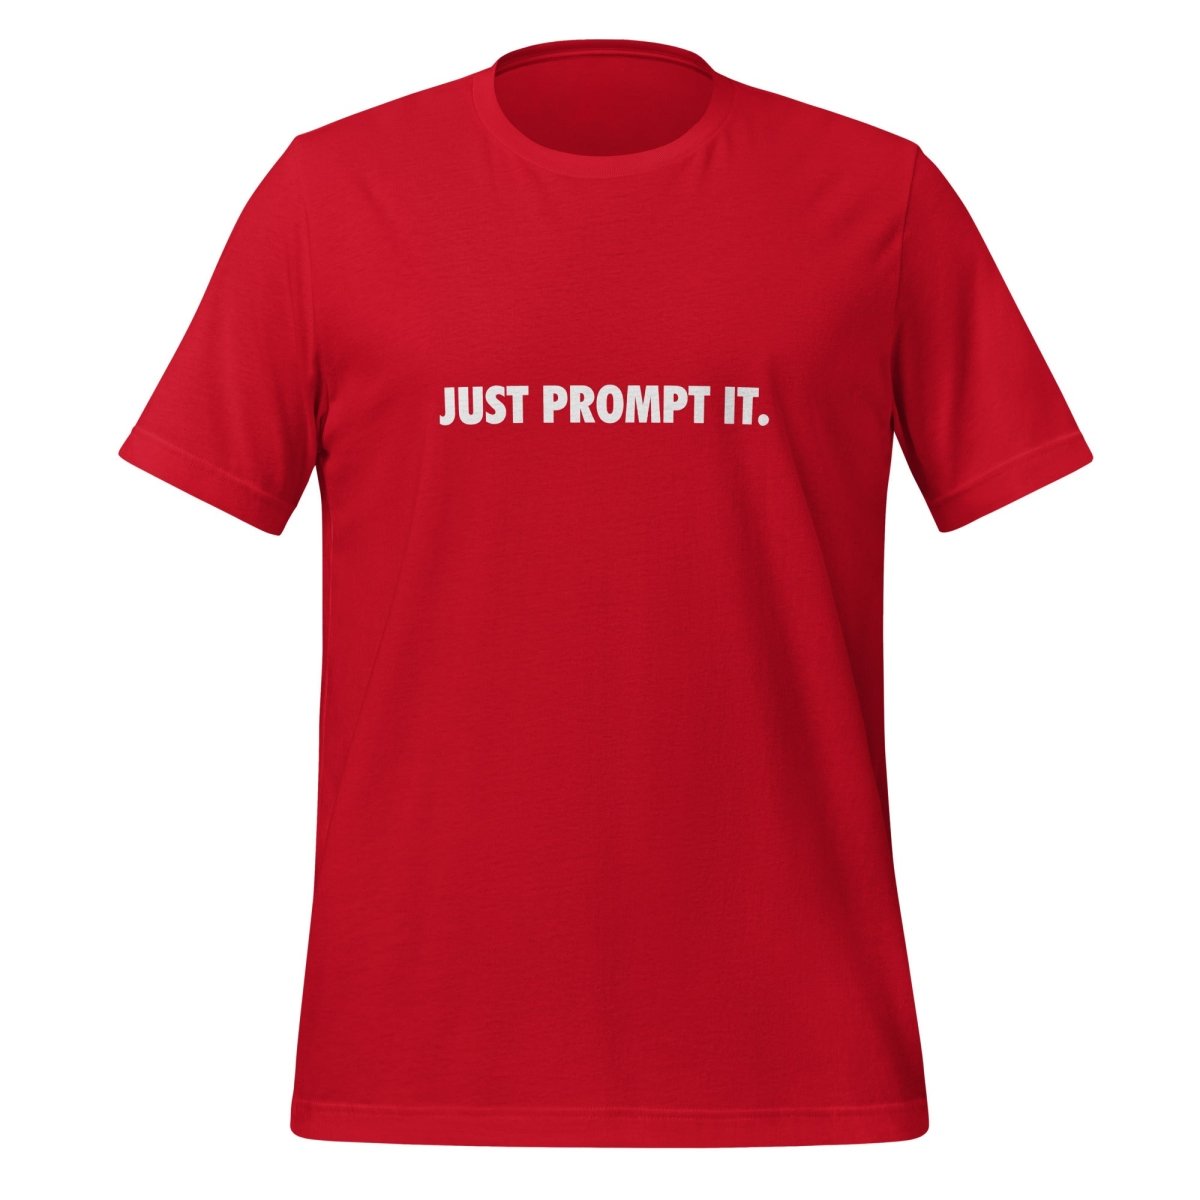 JUST PROMPT IT. T - Shirt (unisex) - Red - AI Store